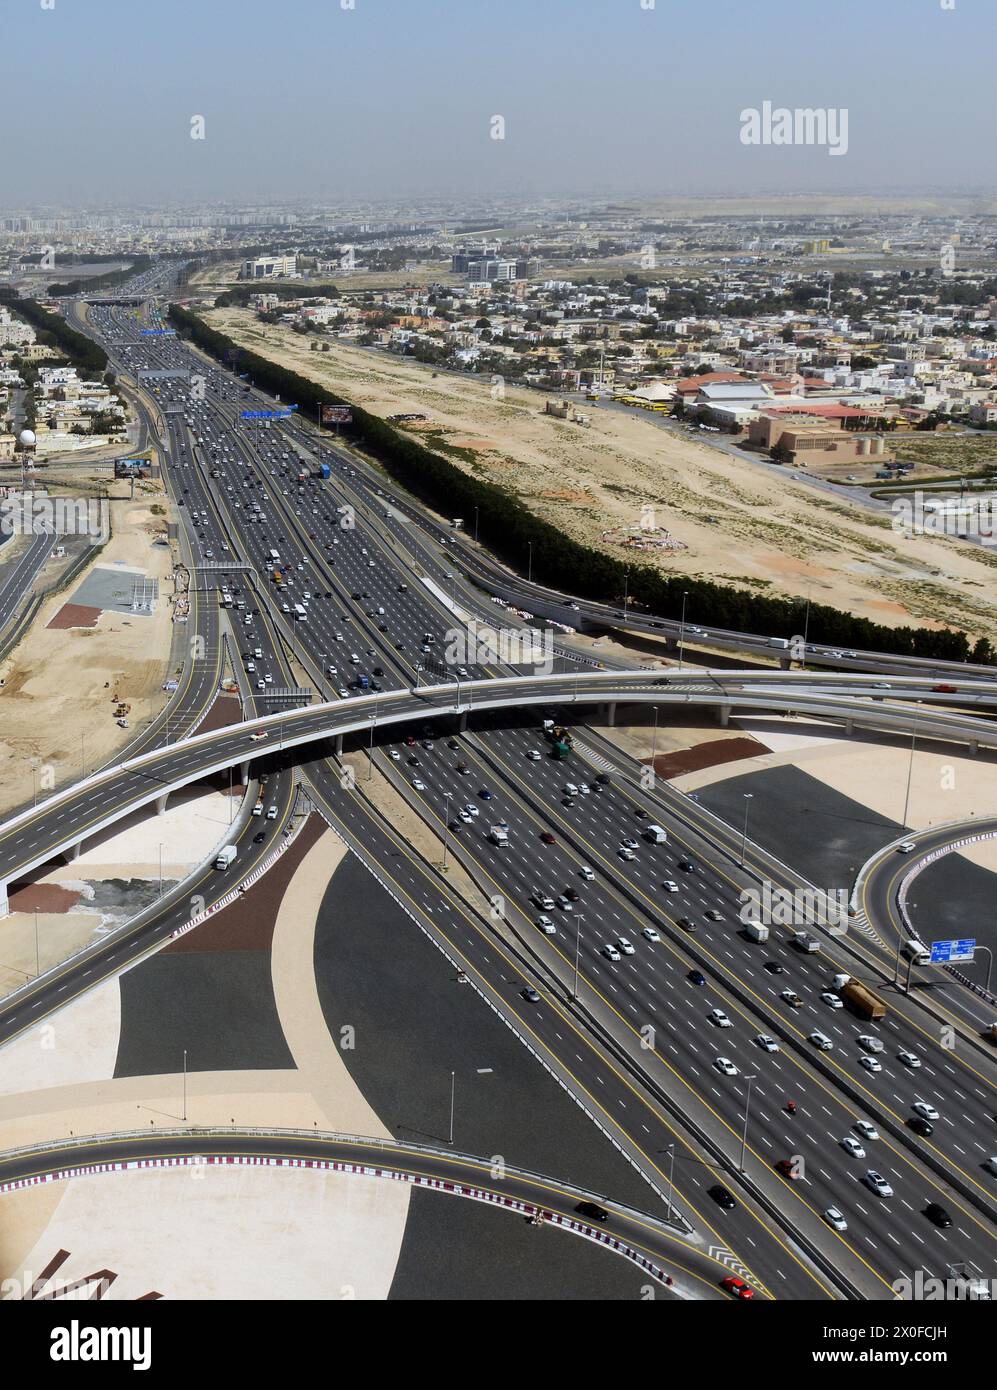 Aerial view of a major highway in Dubai, UAE. Stock Photo